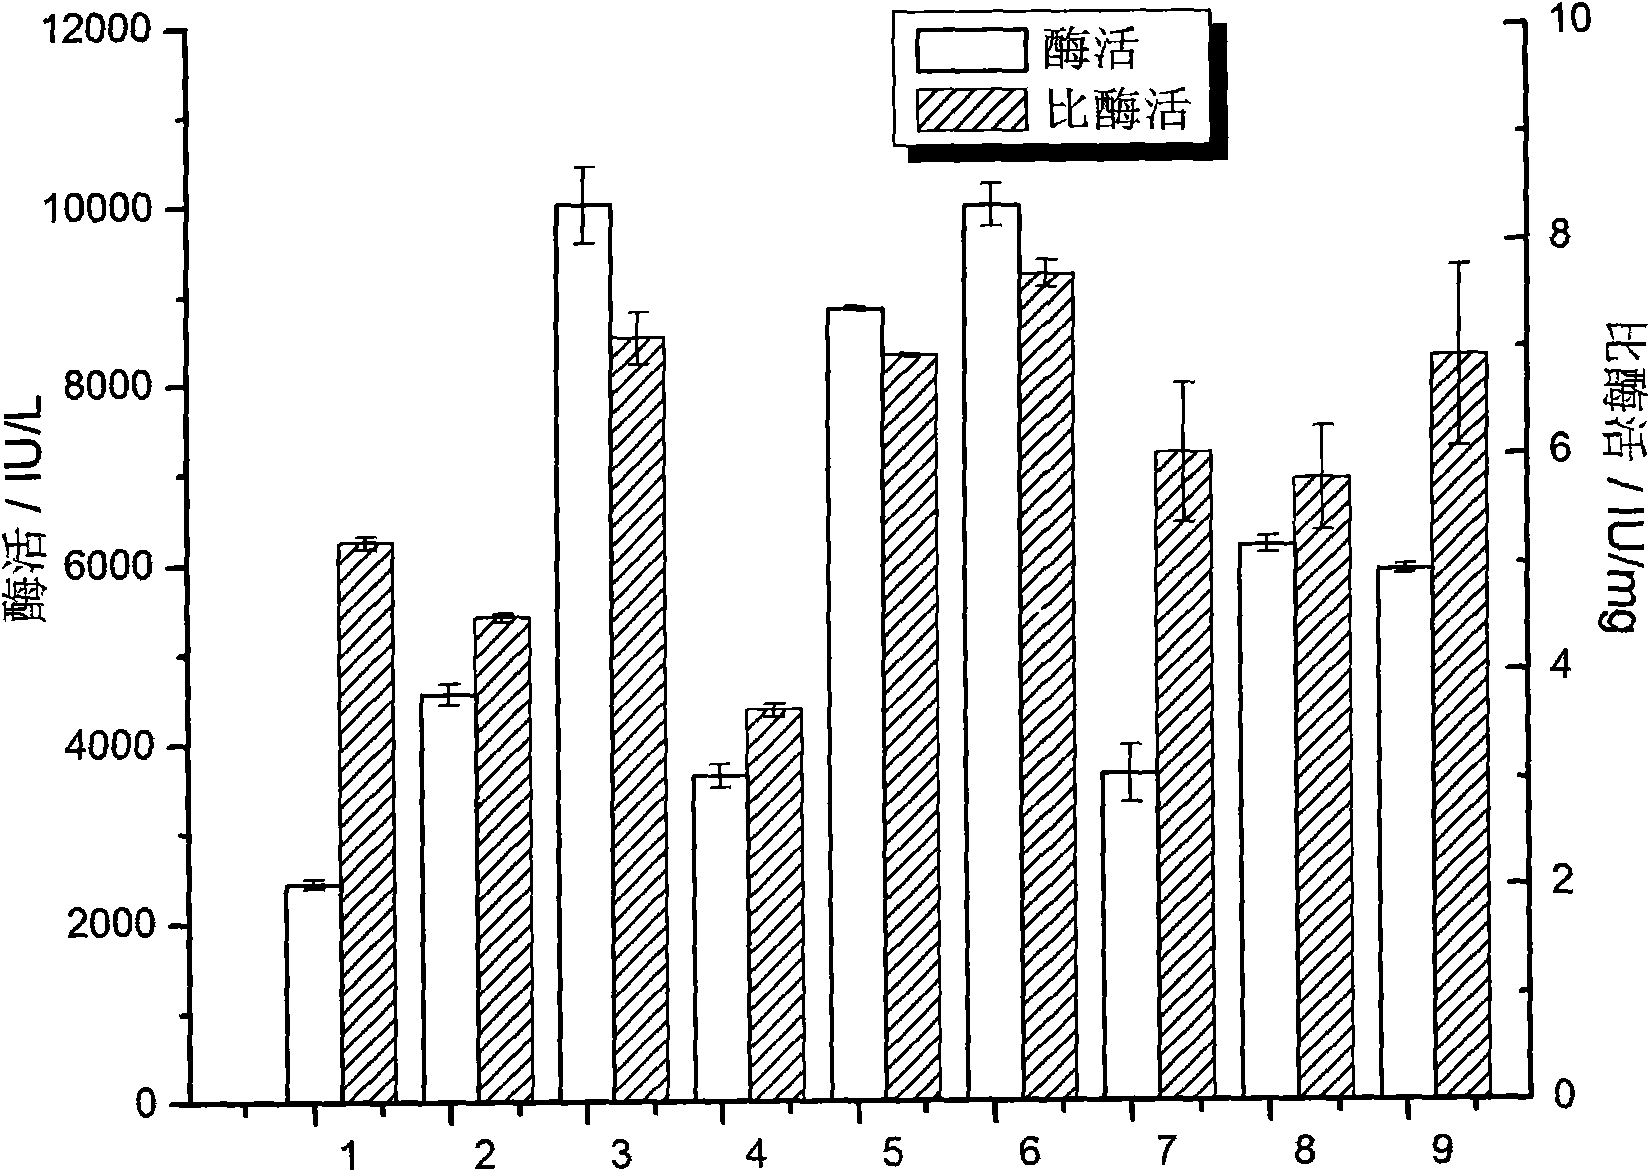 Culture medium used for culturing microbial expression heparanase